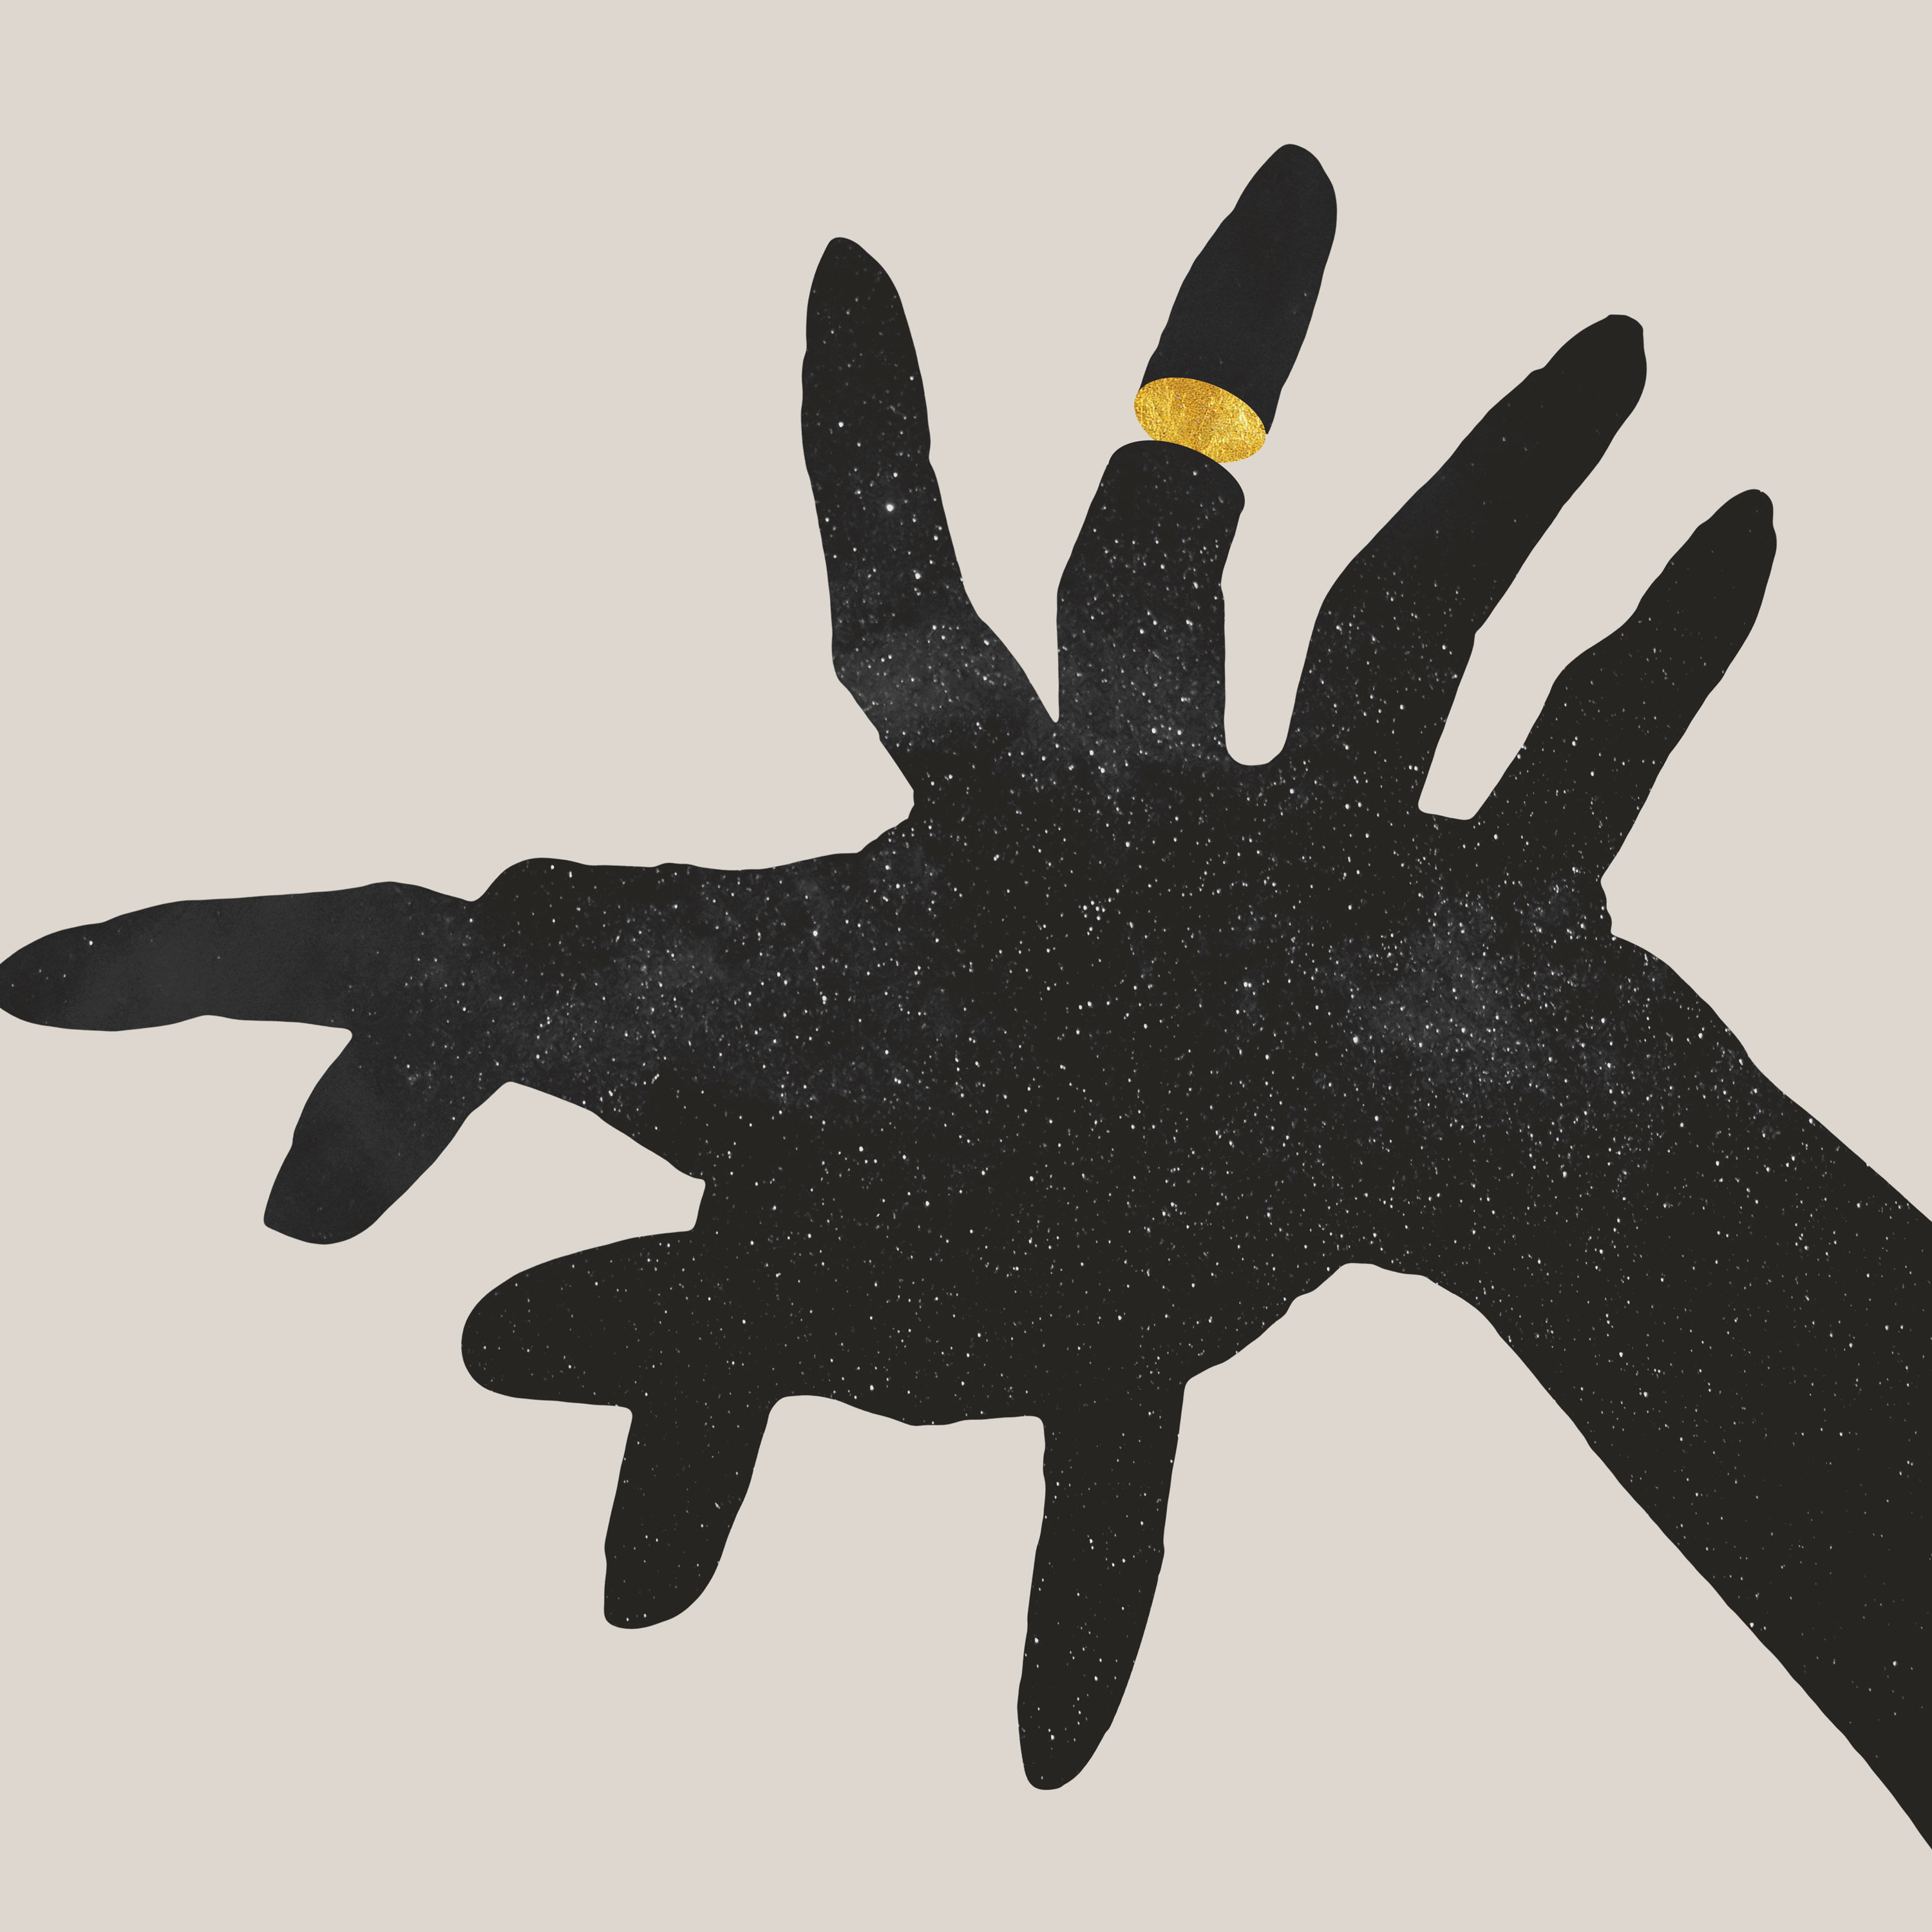 Son Lux Announces New Album 'Remedy' out on May 12th